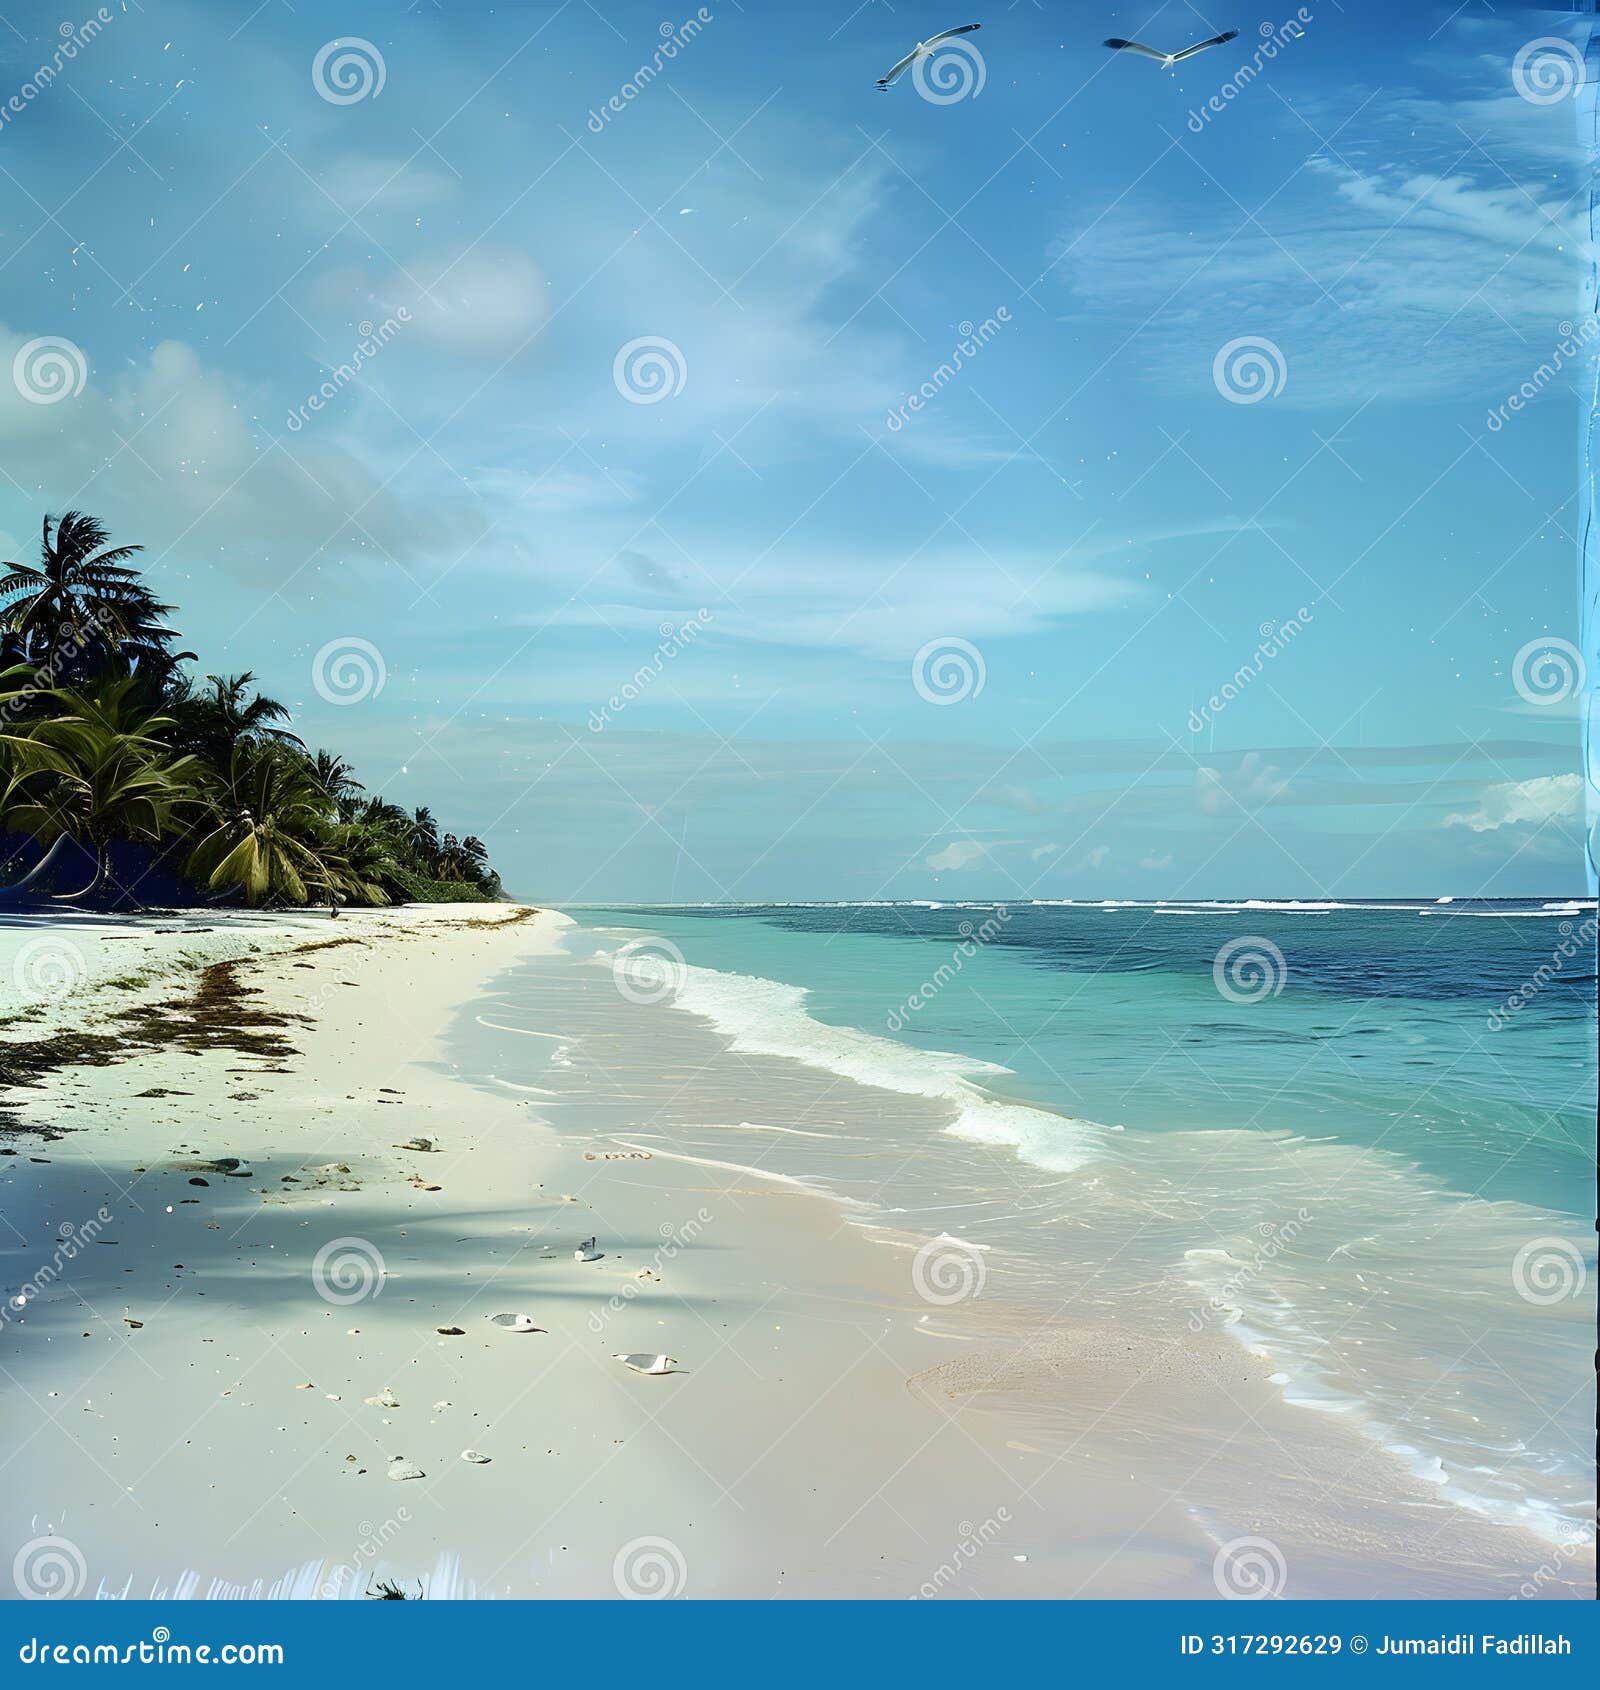 unspoiled beauty idyllic beach with soft white sands and crystal-clear waters. tranquil paradise